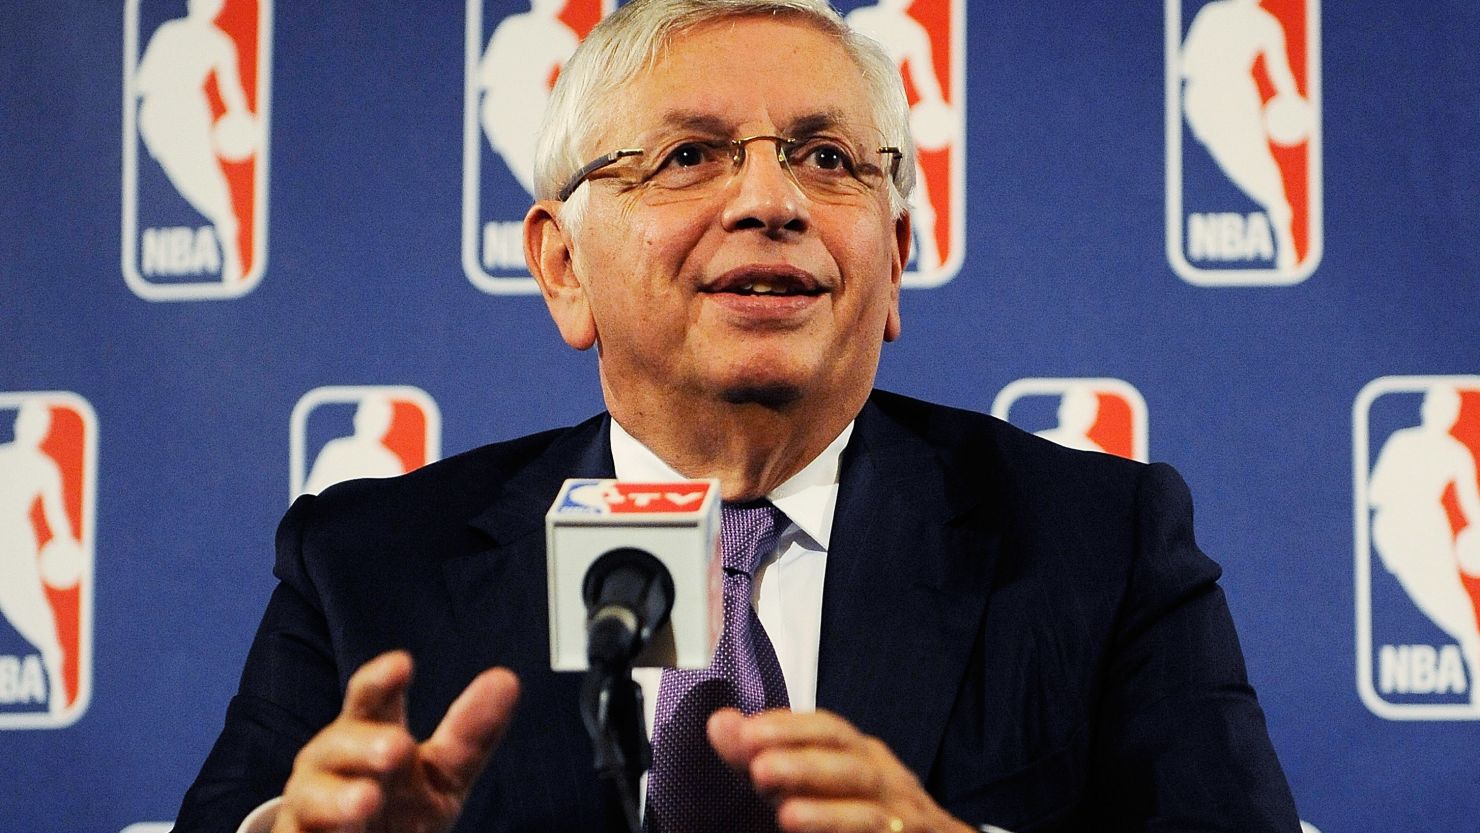 NBA team owners want cost-cutting help from players, NBA Commissioner David Stern says.